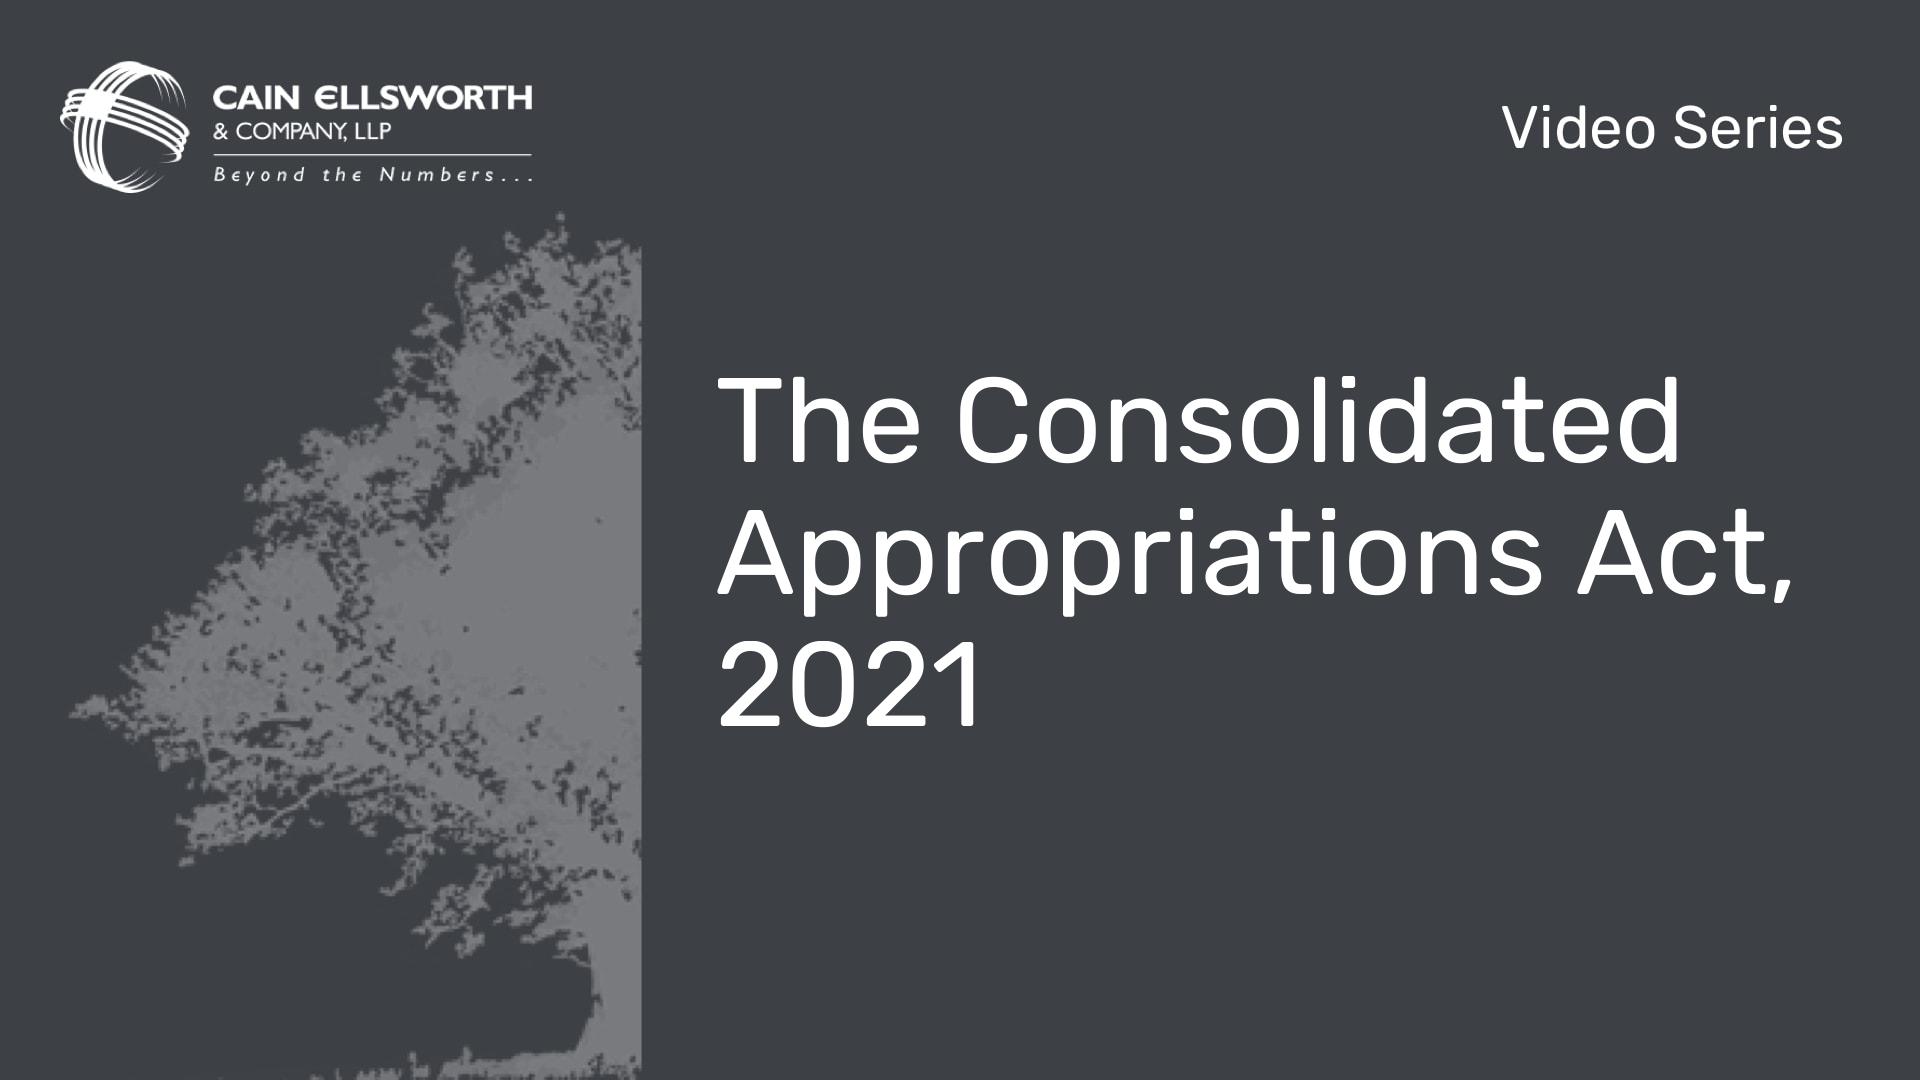 The Consolidated Appropriations Act, 2021 Cain Ellsworth and Company, LLP